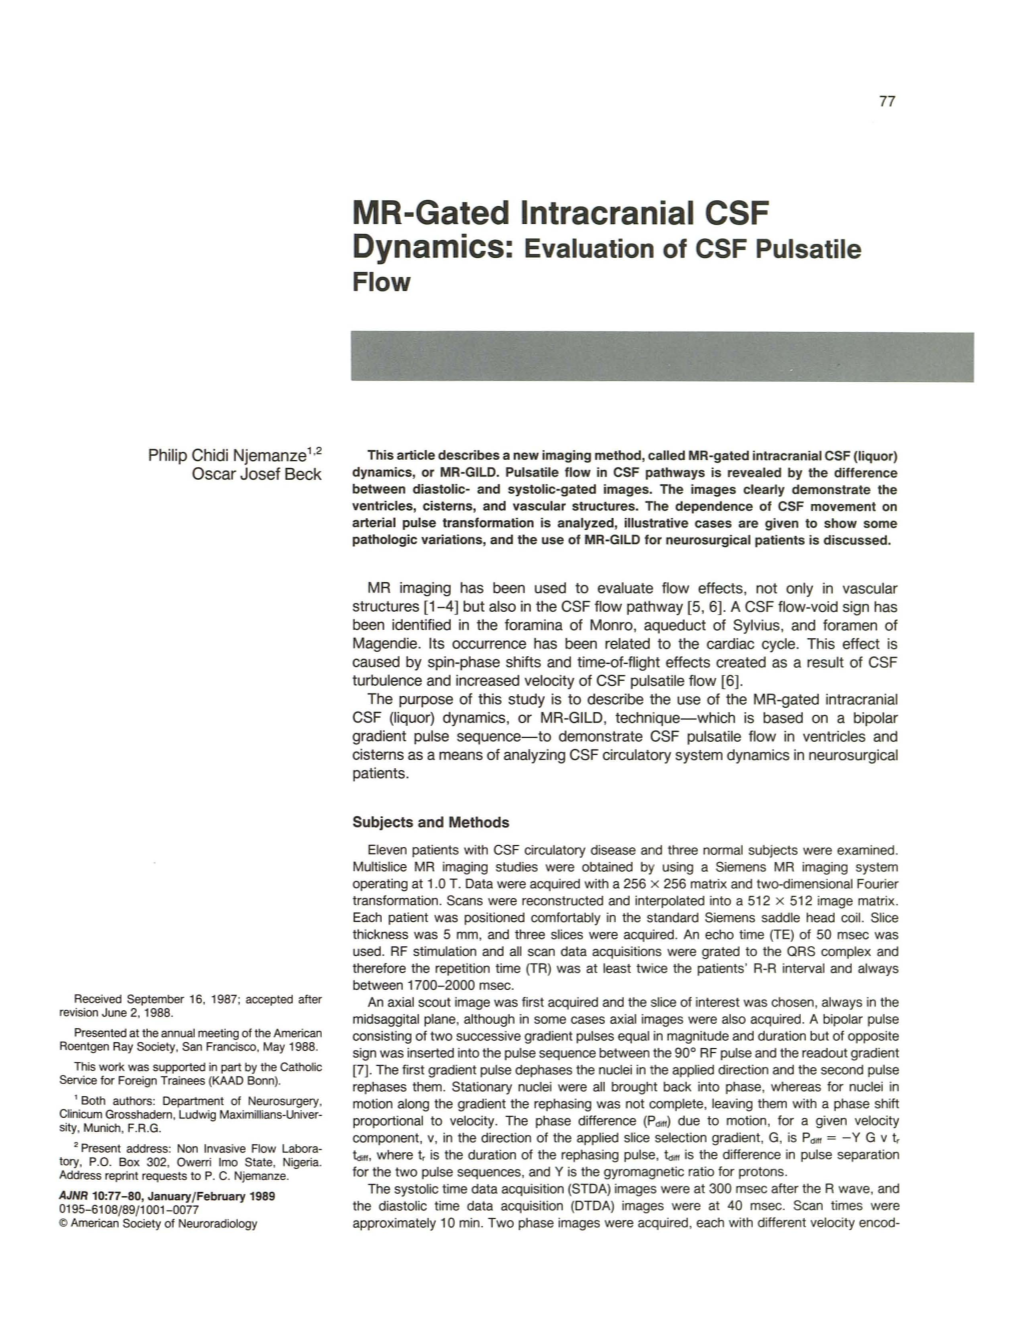 MR-Gated Intracranial CSF Dynamics: Evaluation of CSF Pulsatile Flow